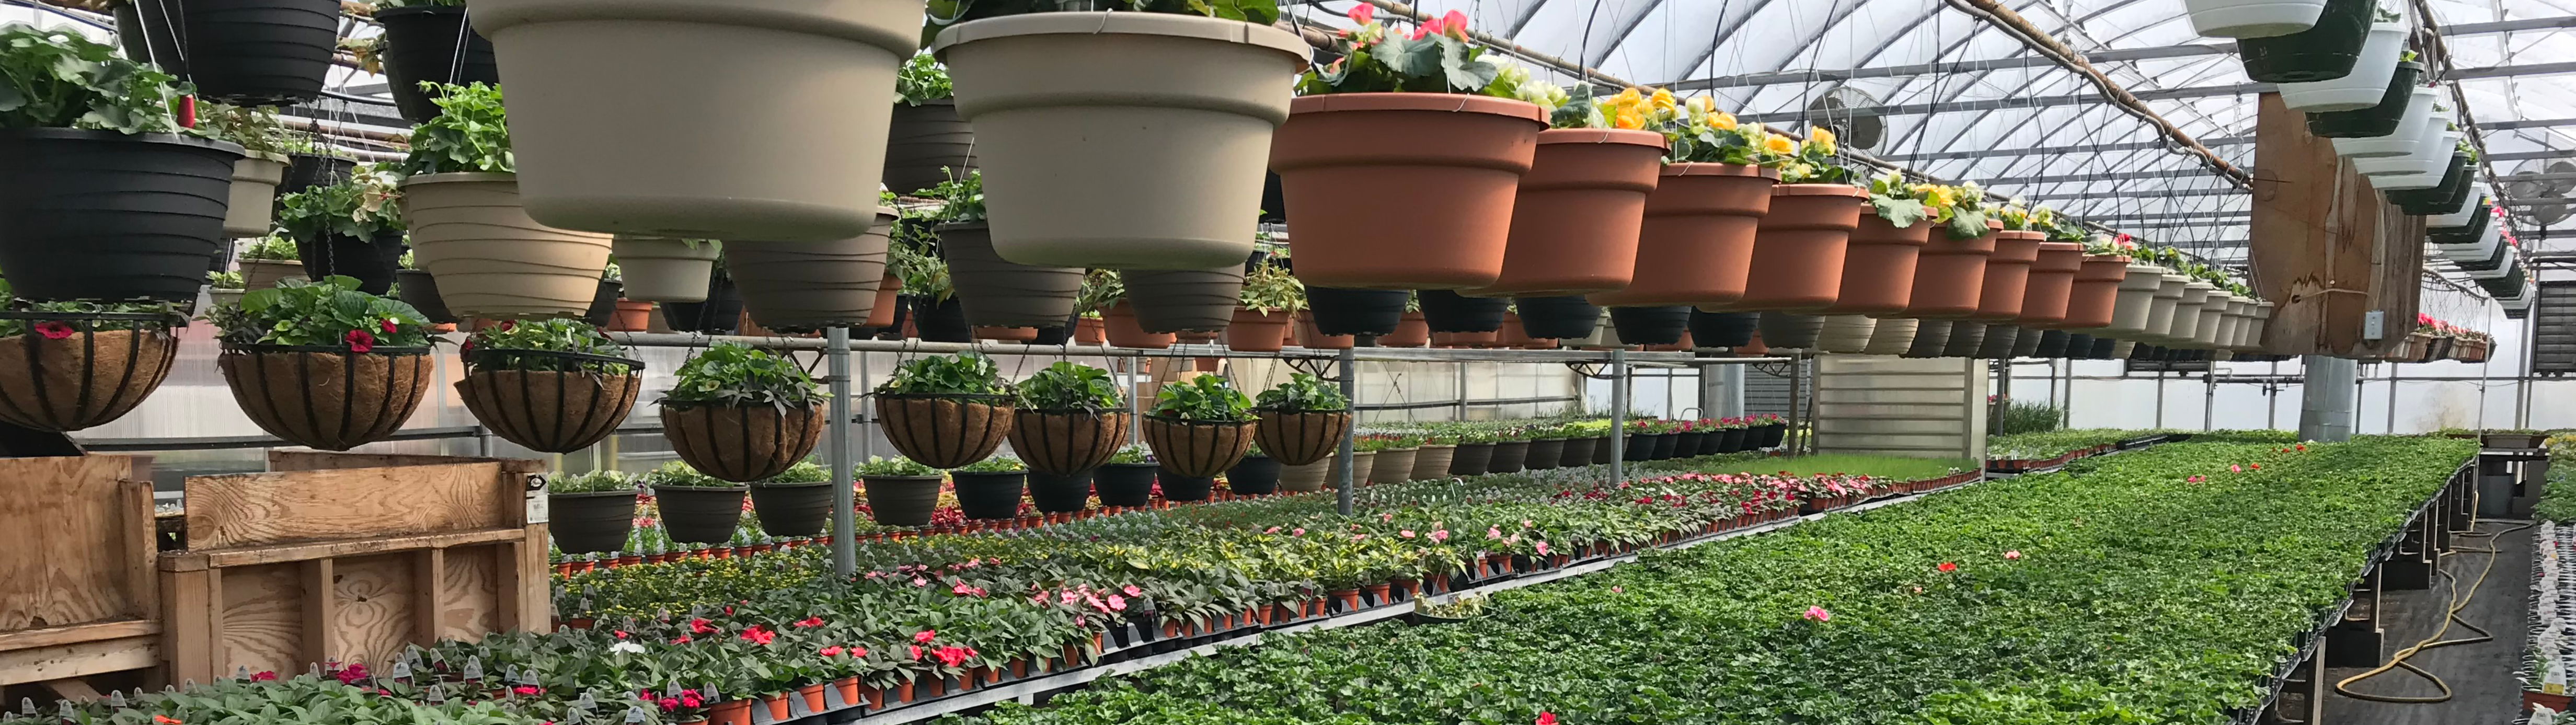 https://www.welchsgreenhouses.com/images/about-in.jpg